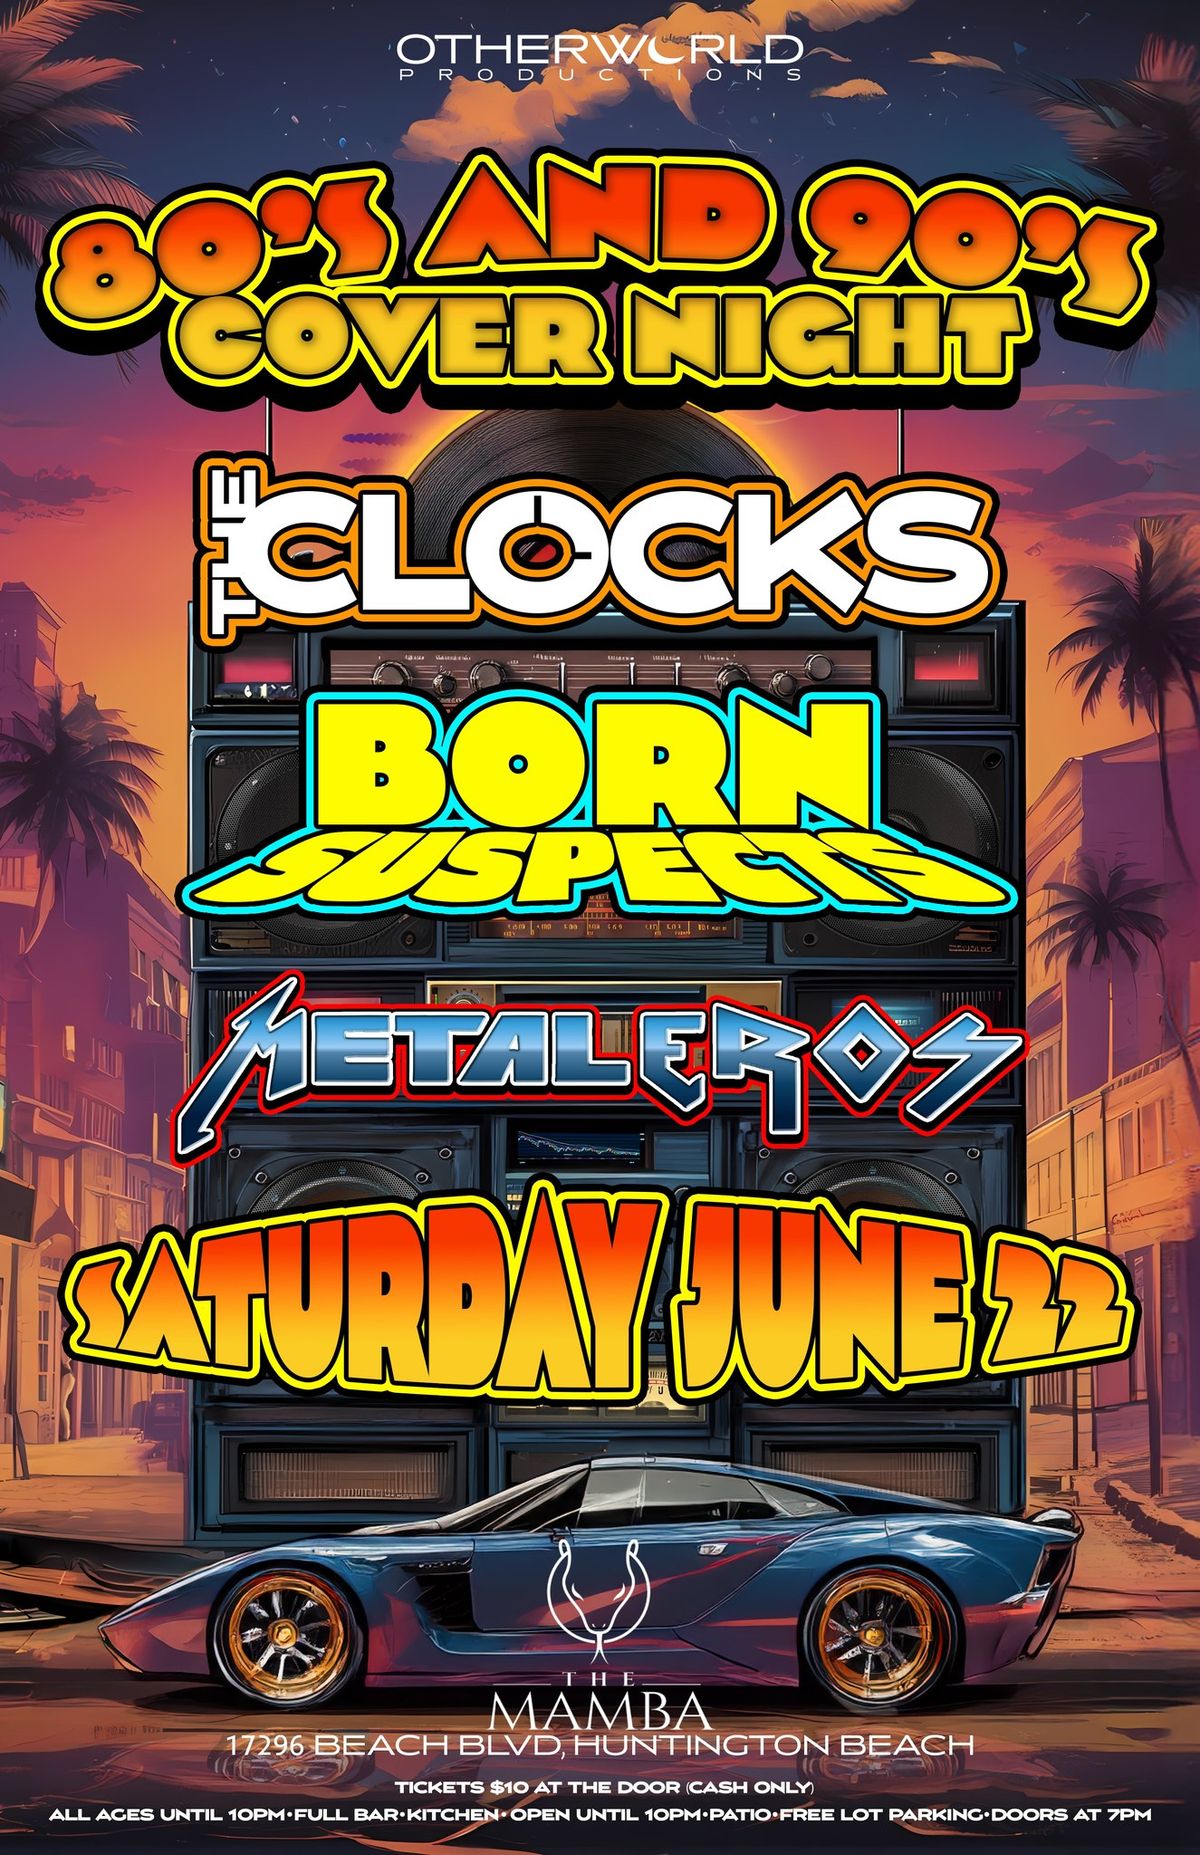 Born Suspects (90s covers) The Clocks (80s pop\/rock covers) Metaleros (Metal Covers)